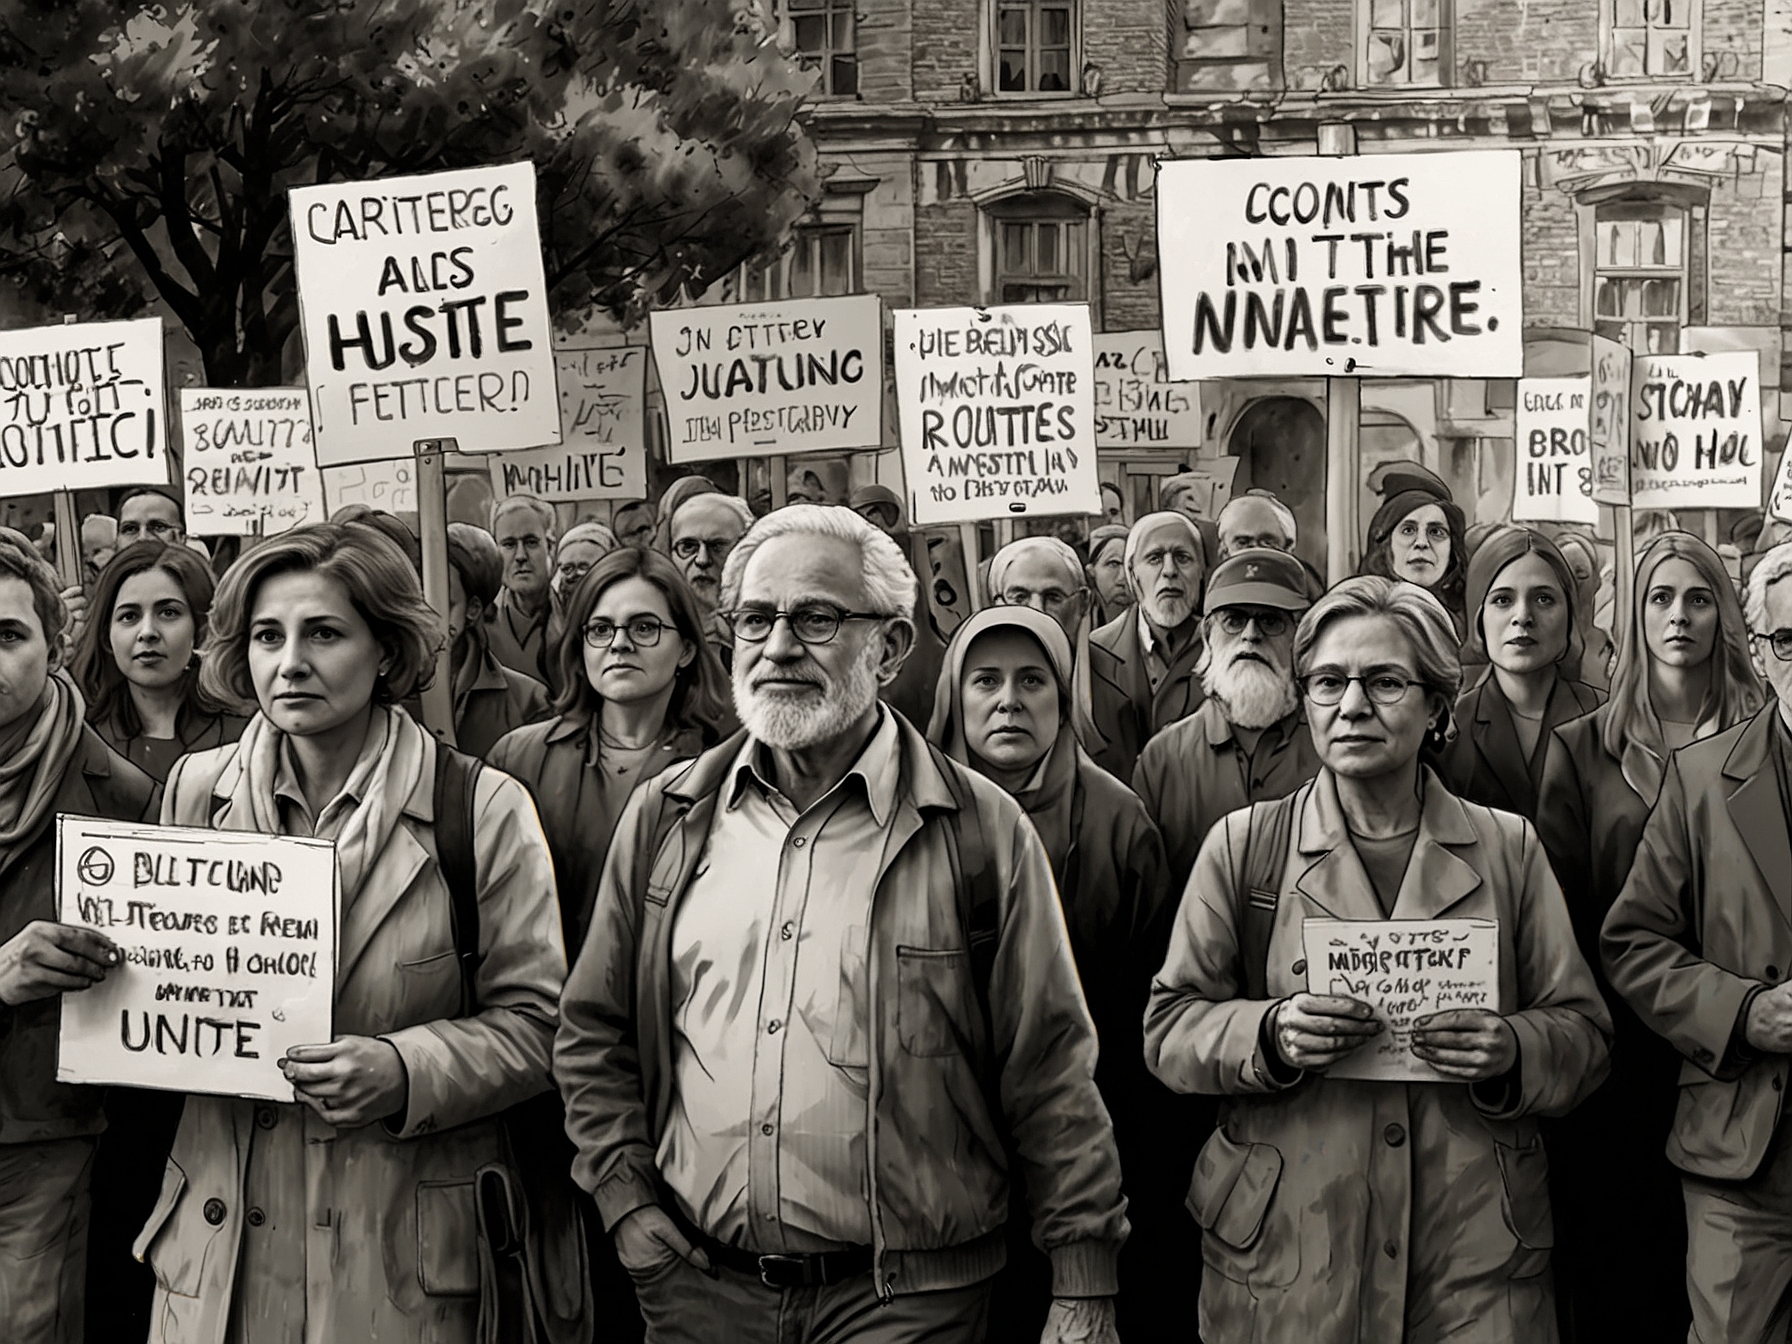 An image depicting a community rally against antisemitism, with diverse individuals holding signs promoting unity and justice, illustrating the collective effort needed to combat hate.